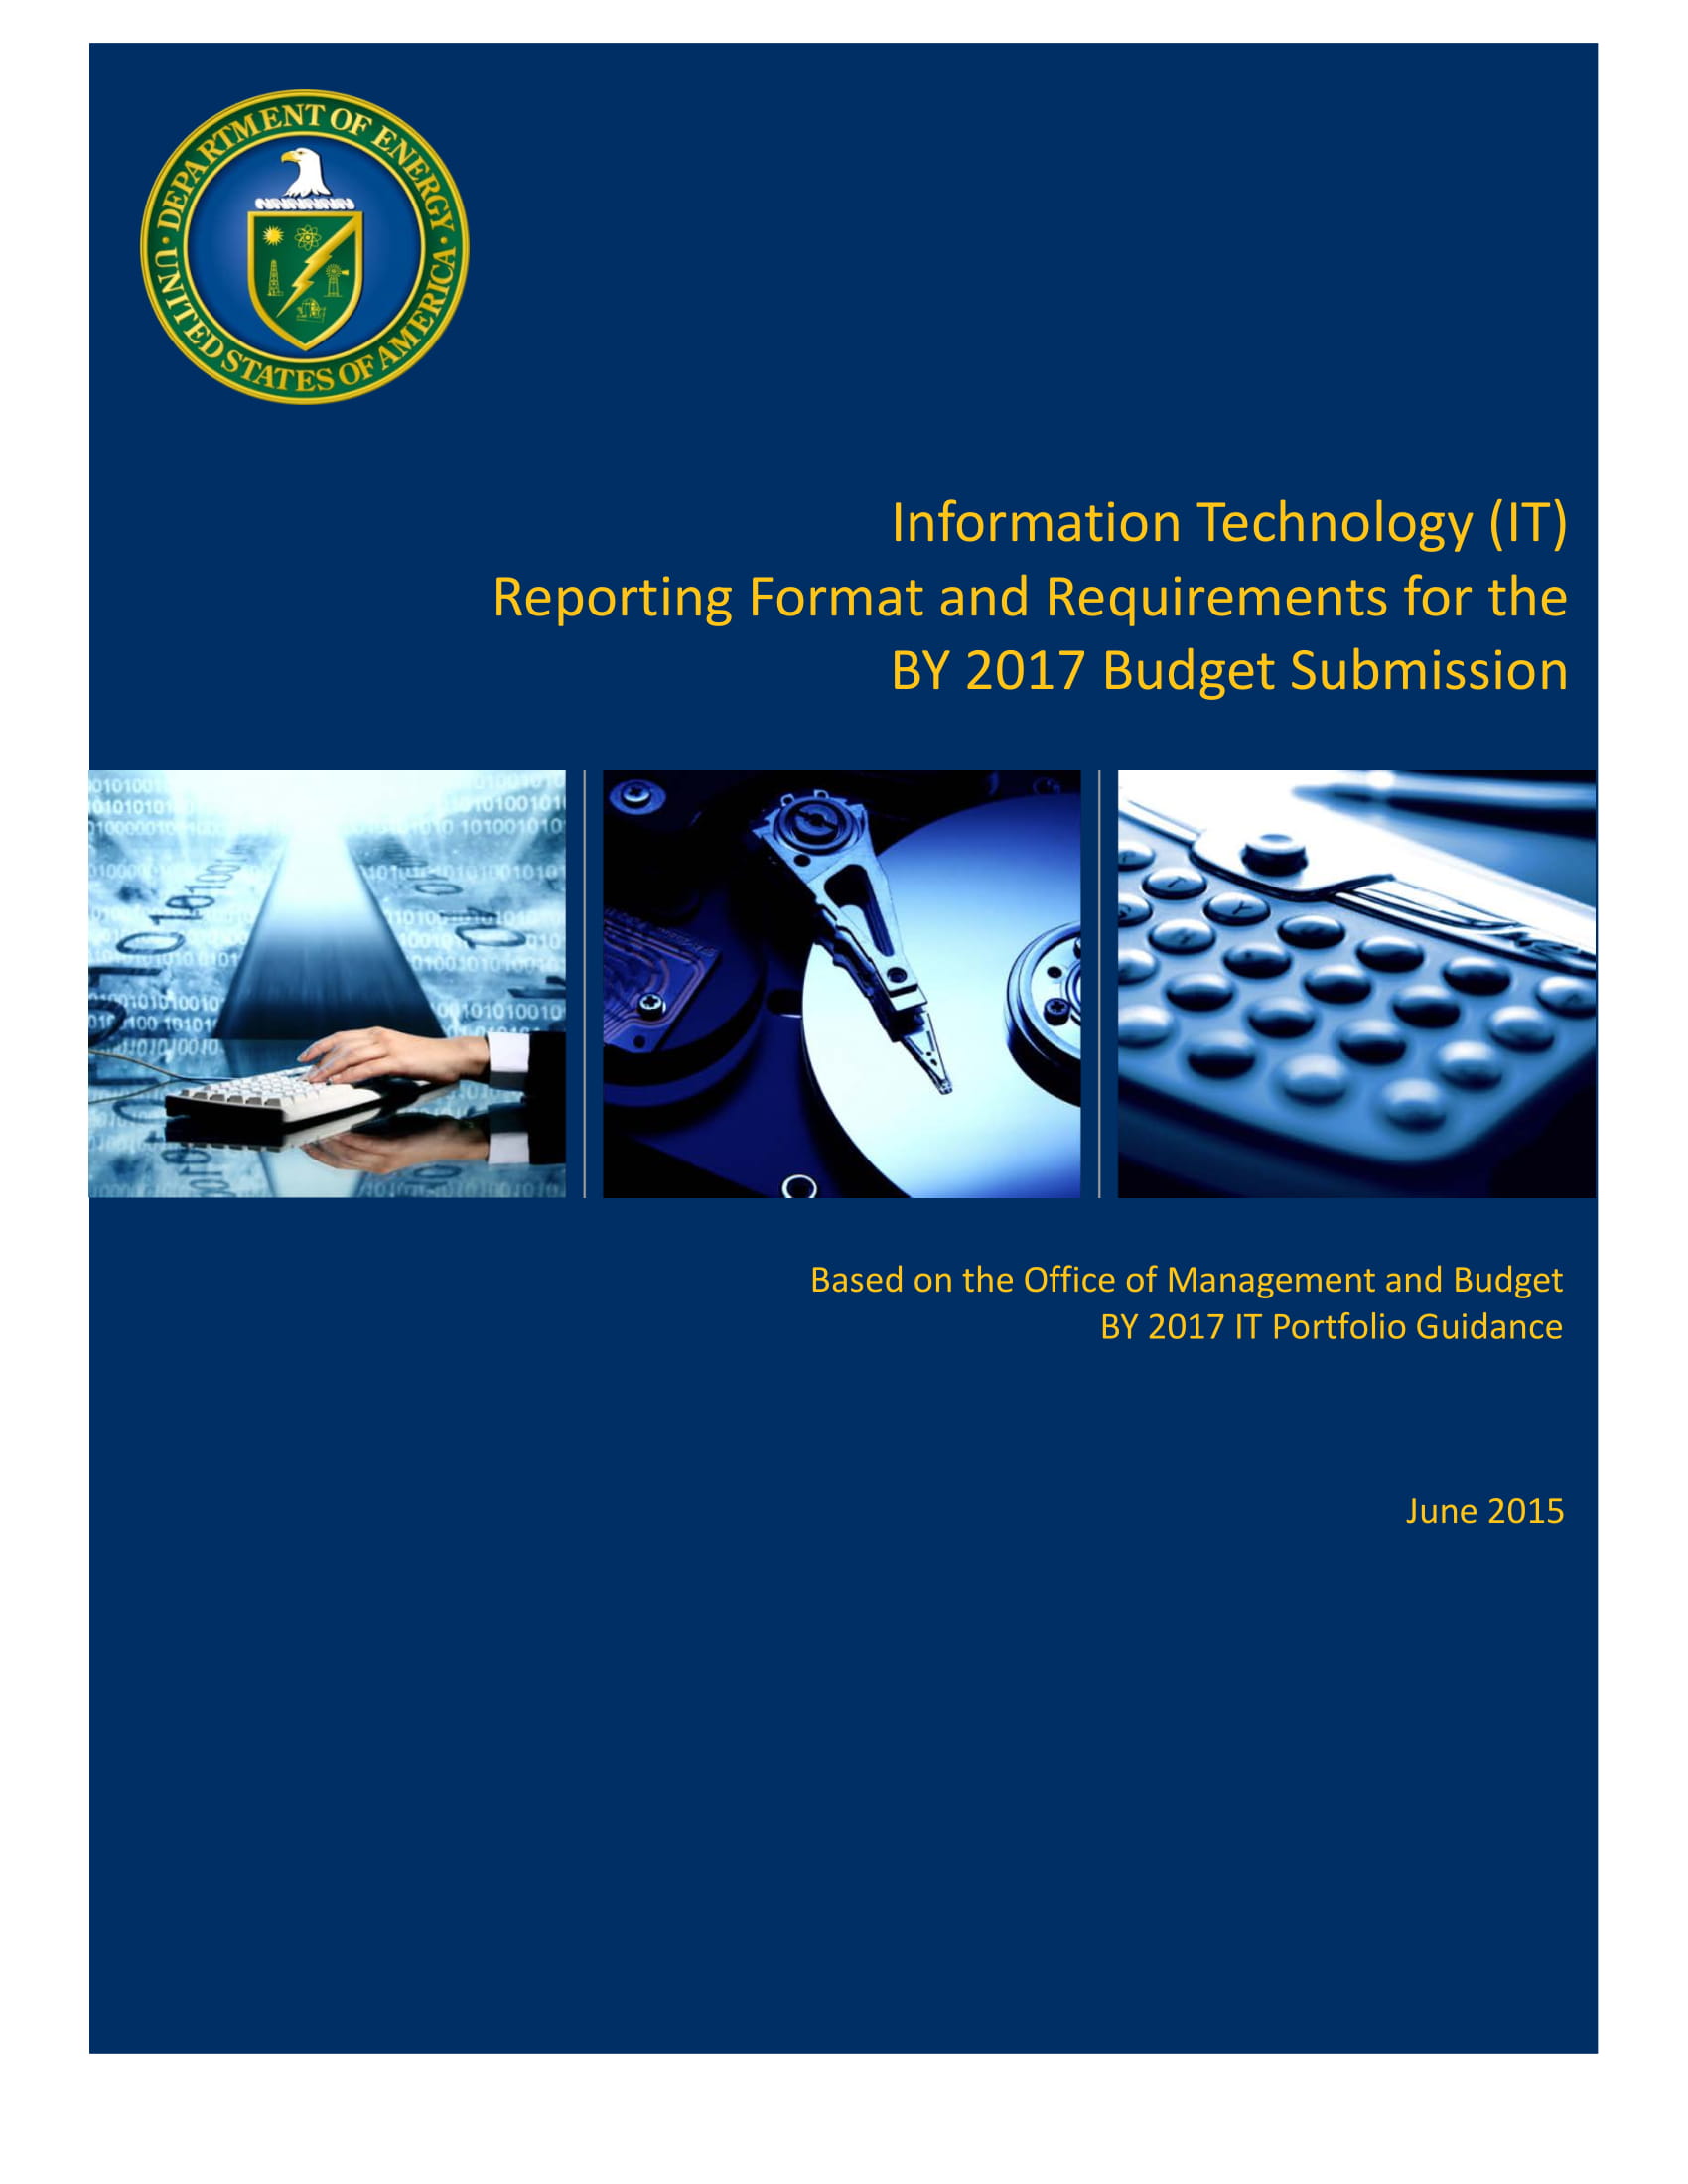 information technology it management report format example 01